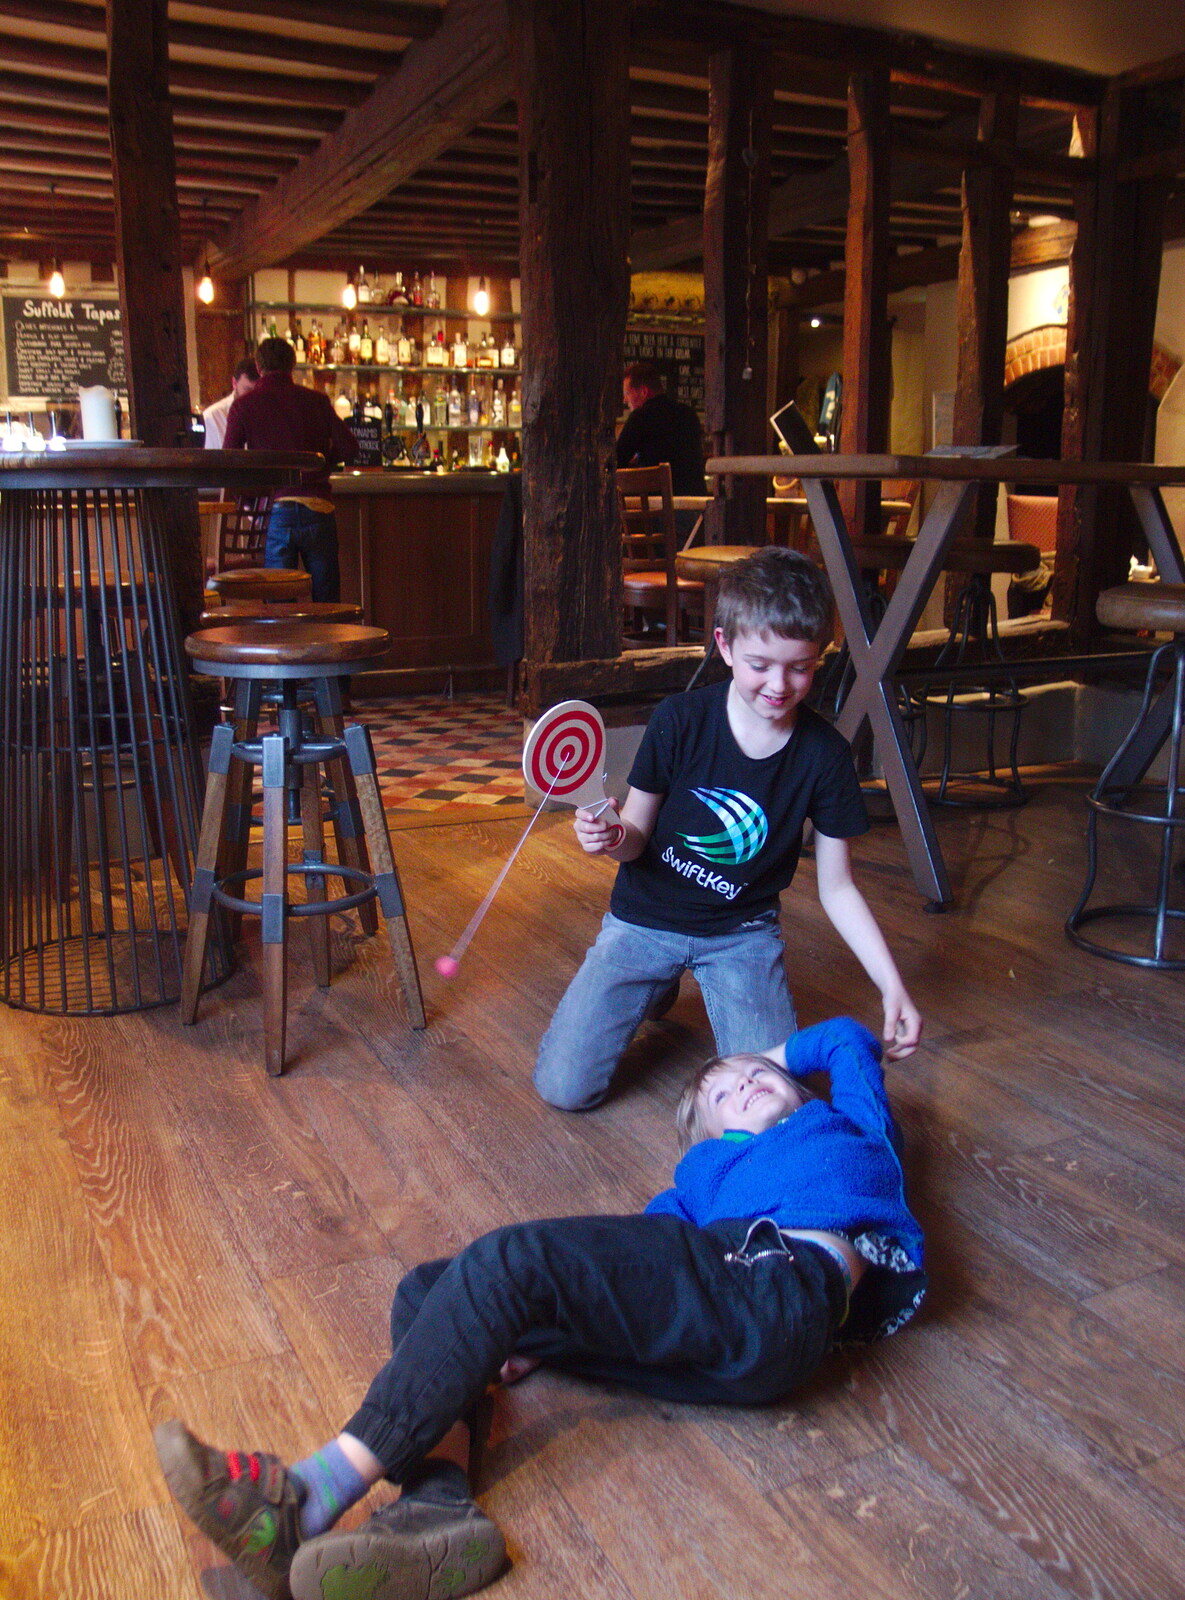 The boys on the floor from Lunch in the Oaksmere, Brome, Suffolk - 14th April 2019